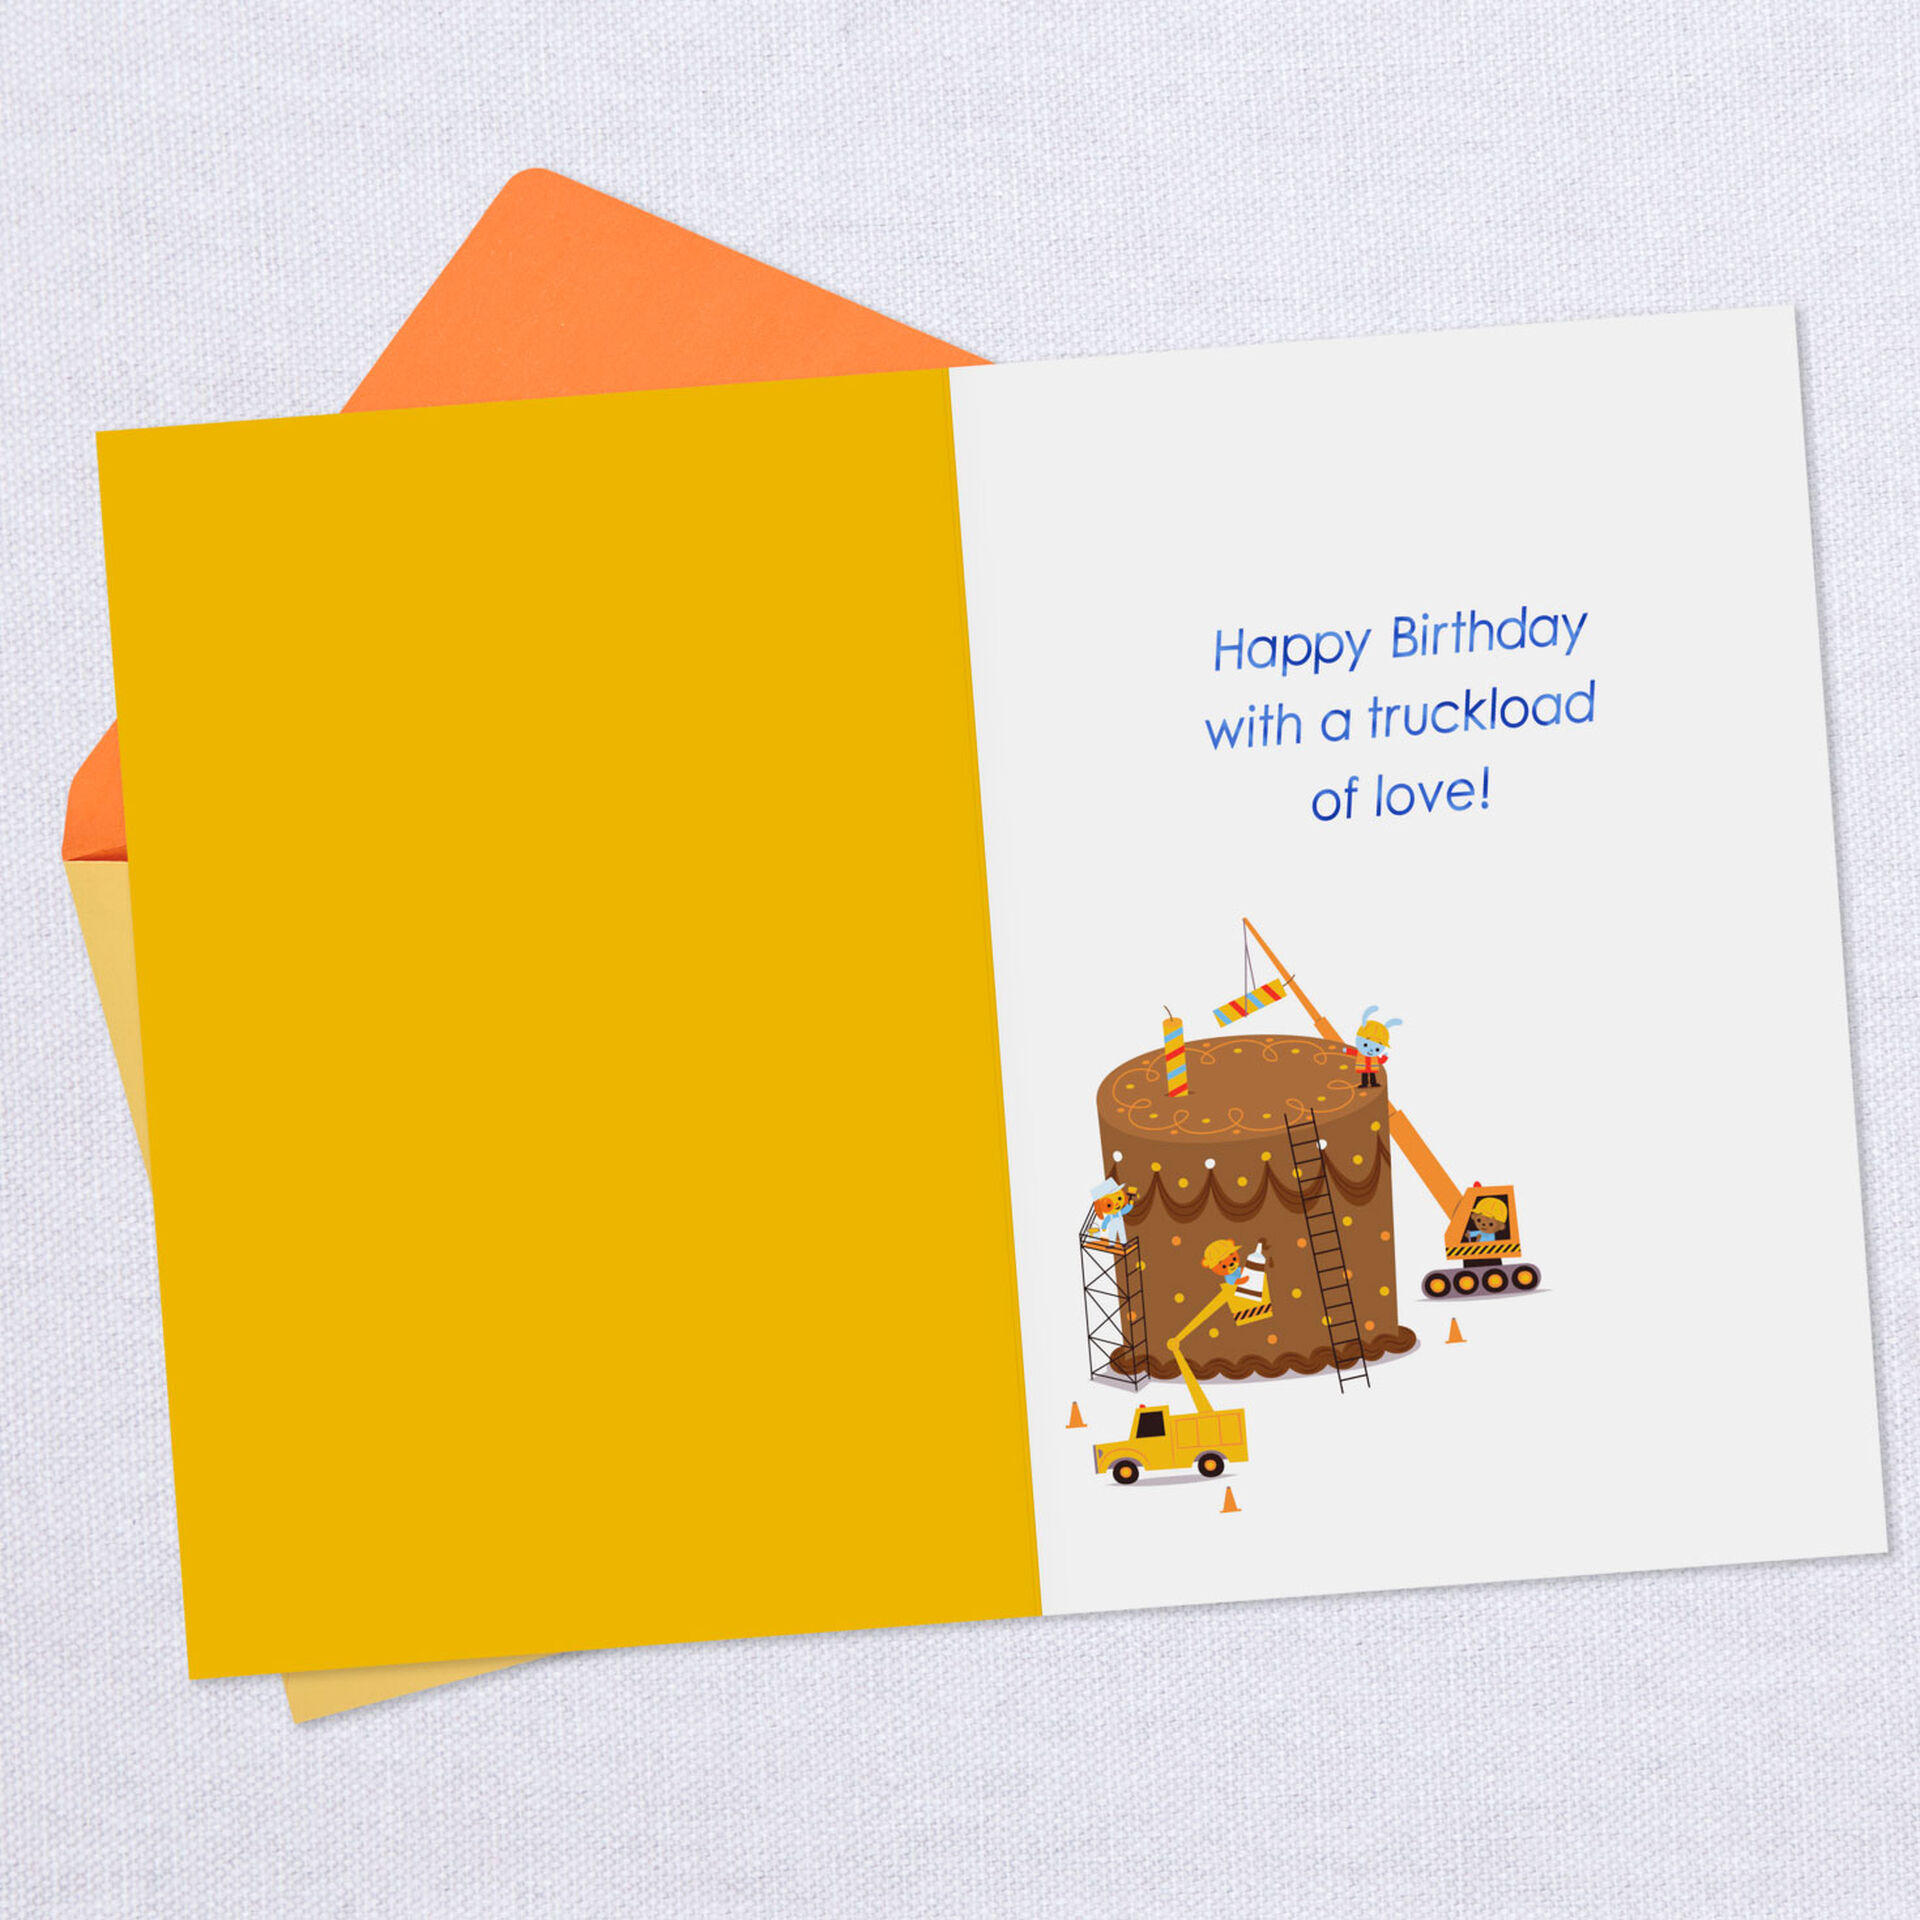 Dump-Truck-With-Balloons-Birthday-Card-for-Grandson_299HKB5842_03